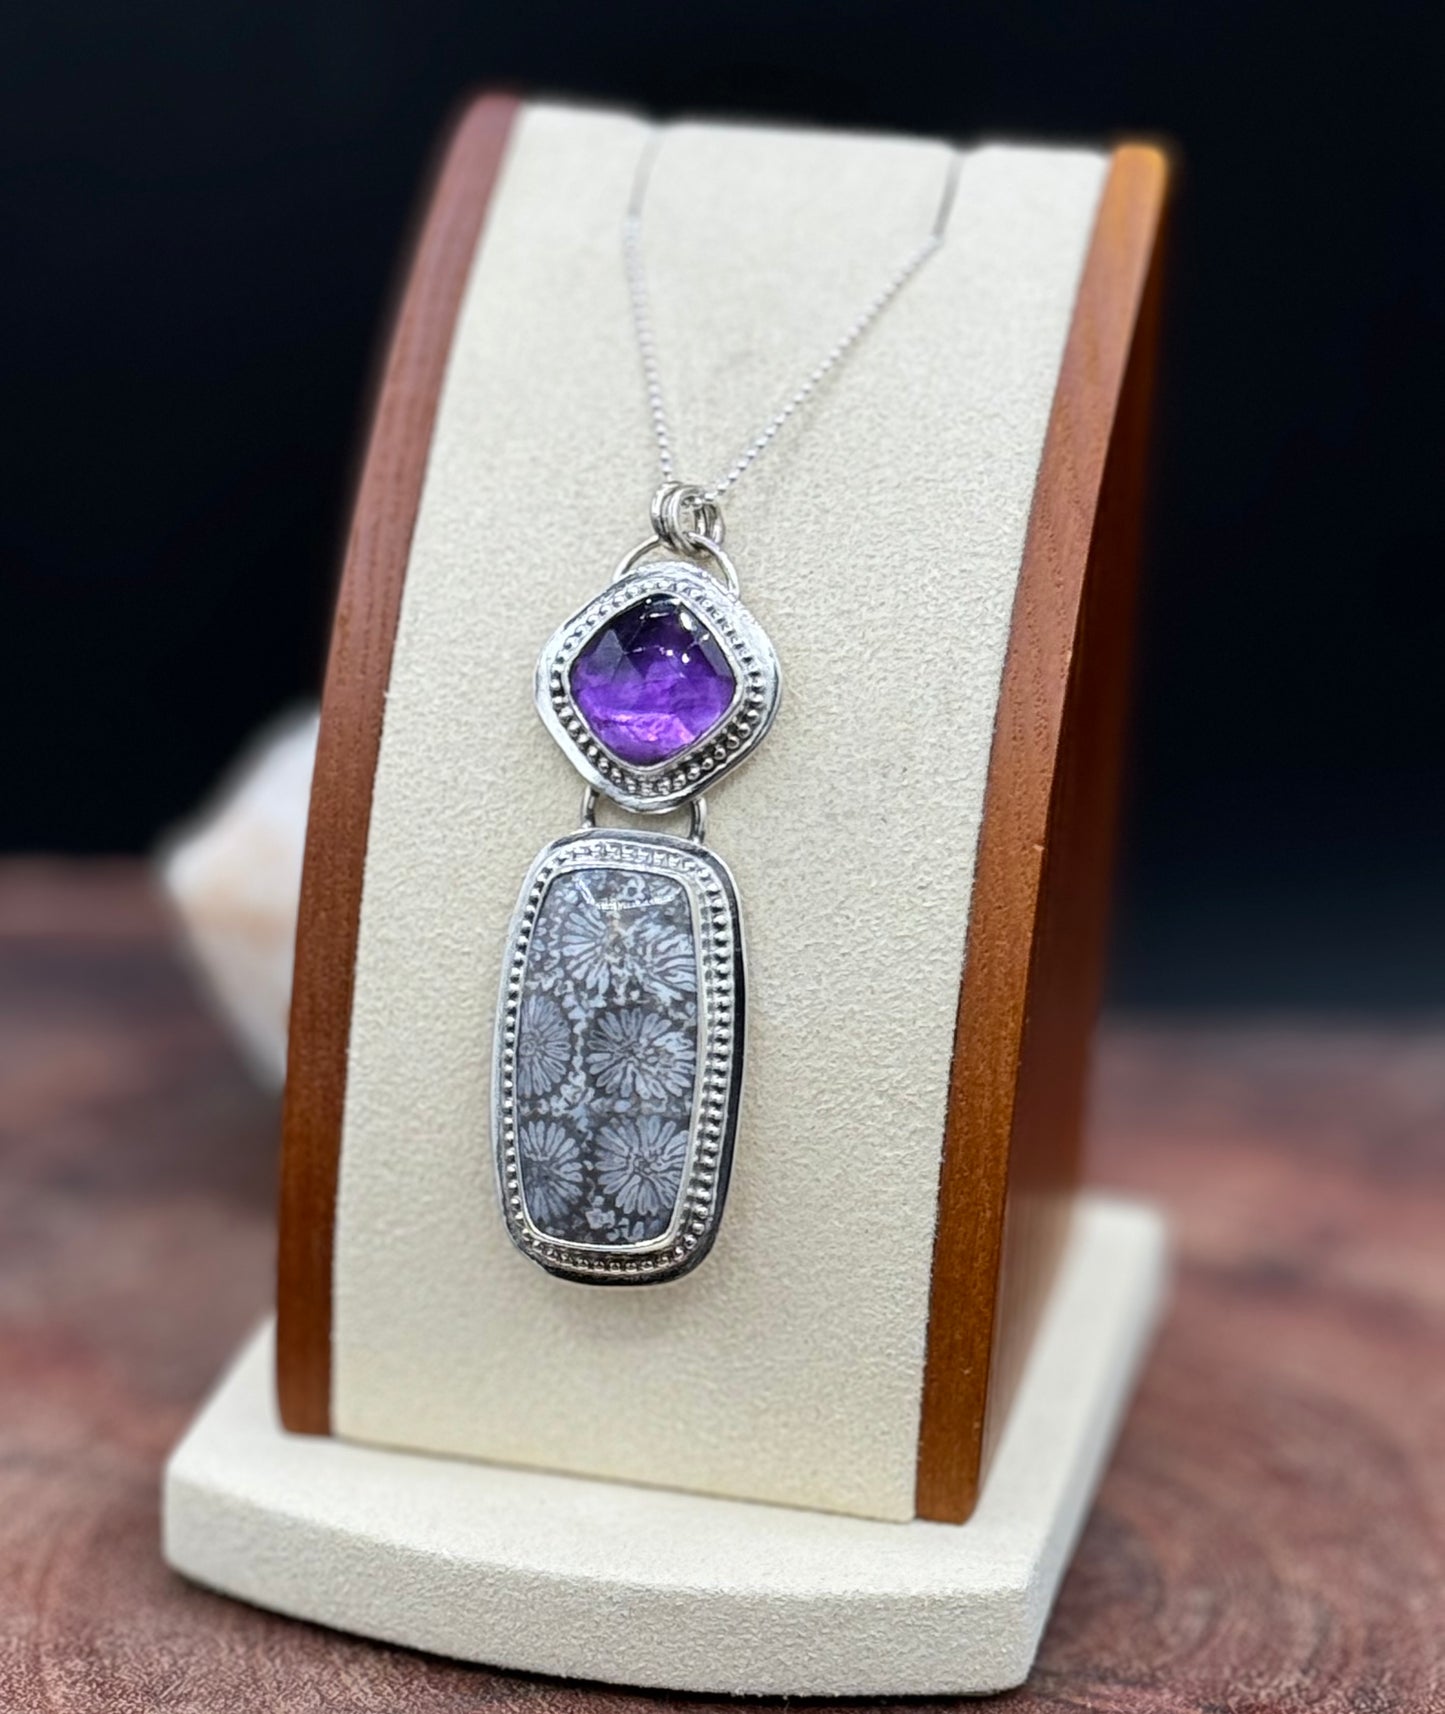 Fossilized Coral and Amethyst Pendant Necklace